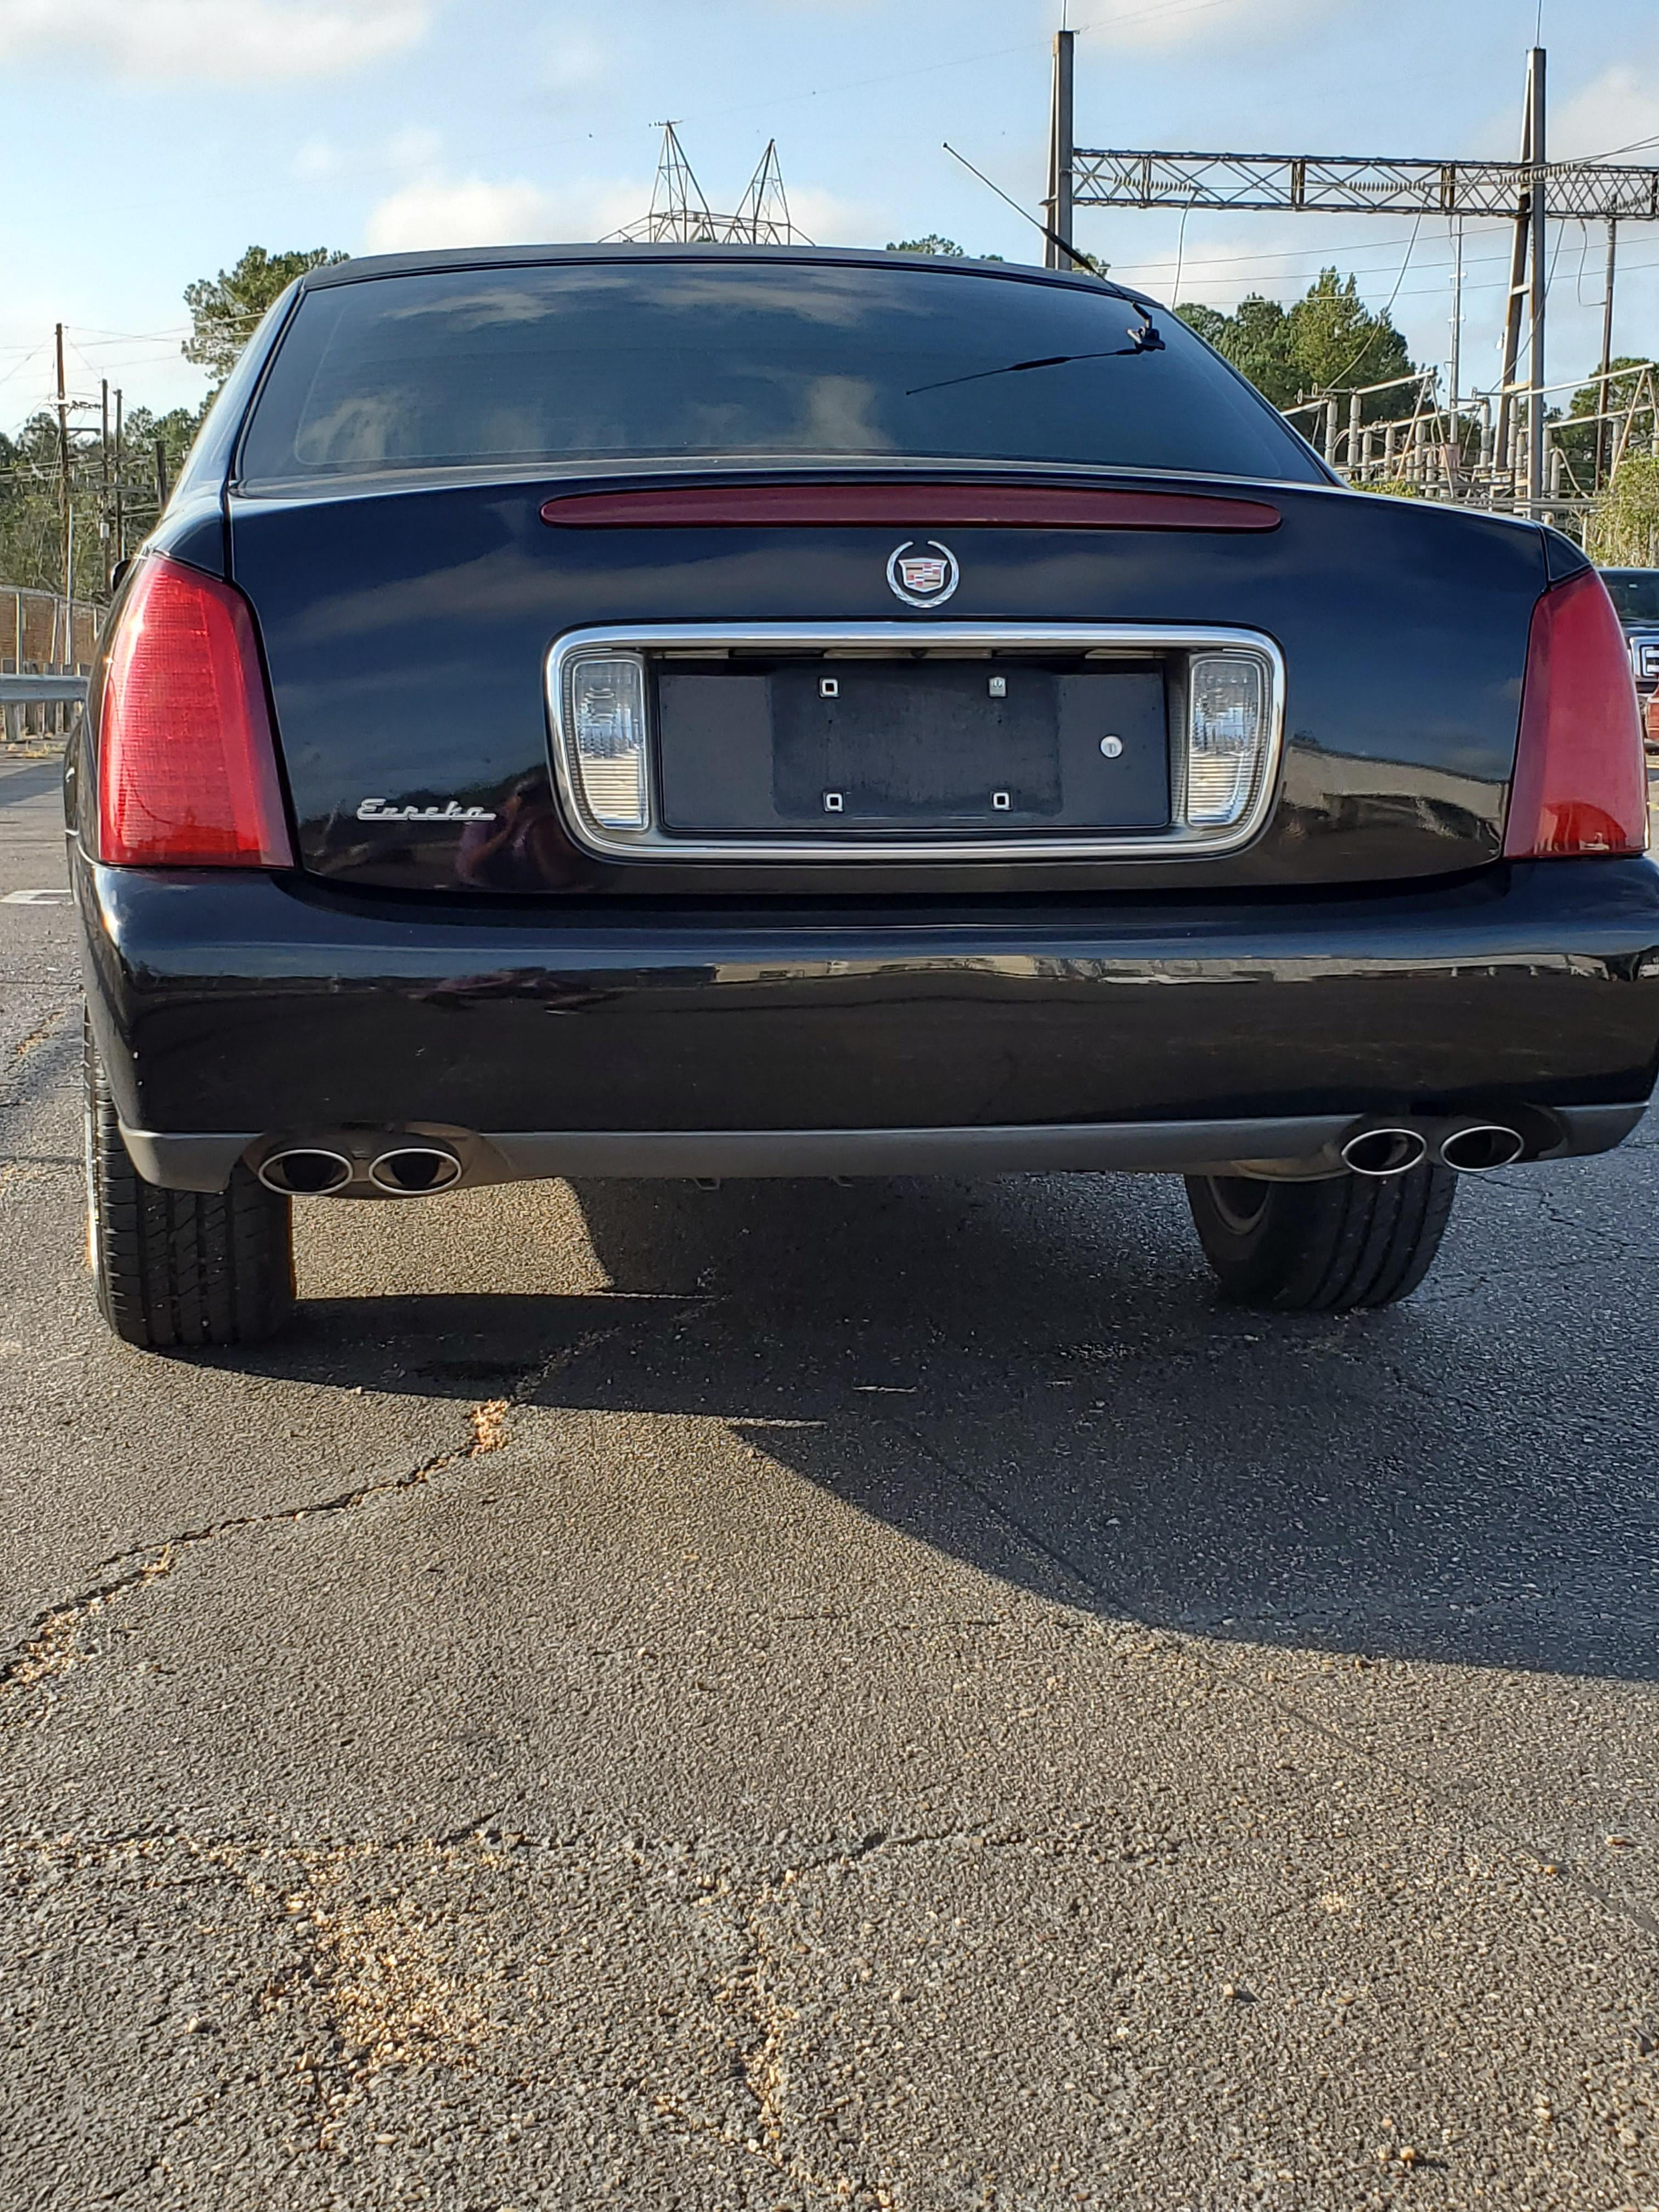 9th Image of a 2003 CADILLAC DEVILLE